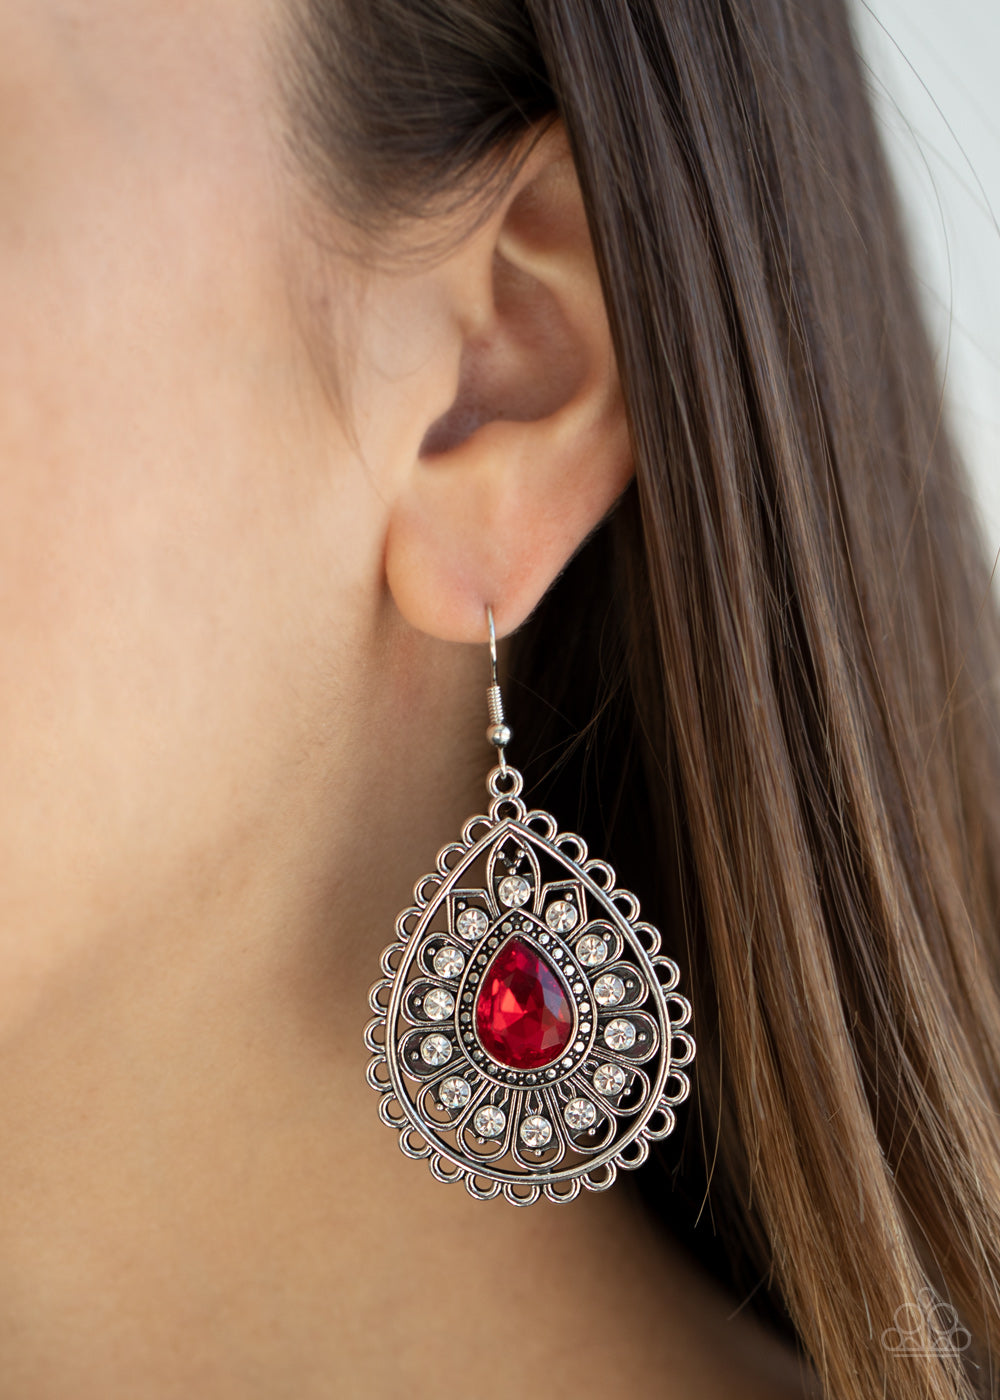 Eat, Drink, and BEAM Merry - Red Paparazzi Earrings